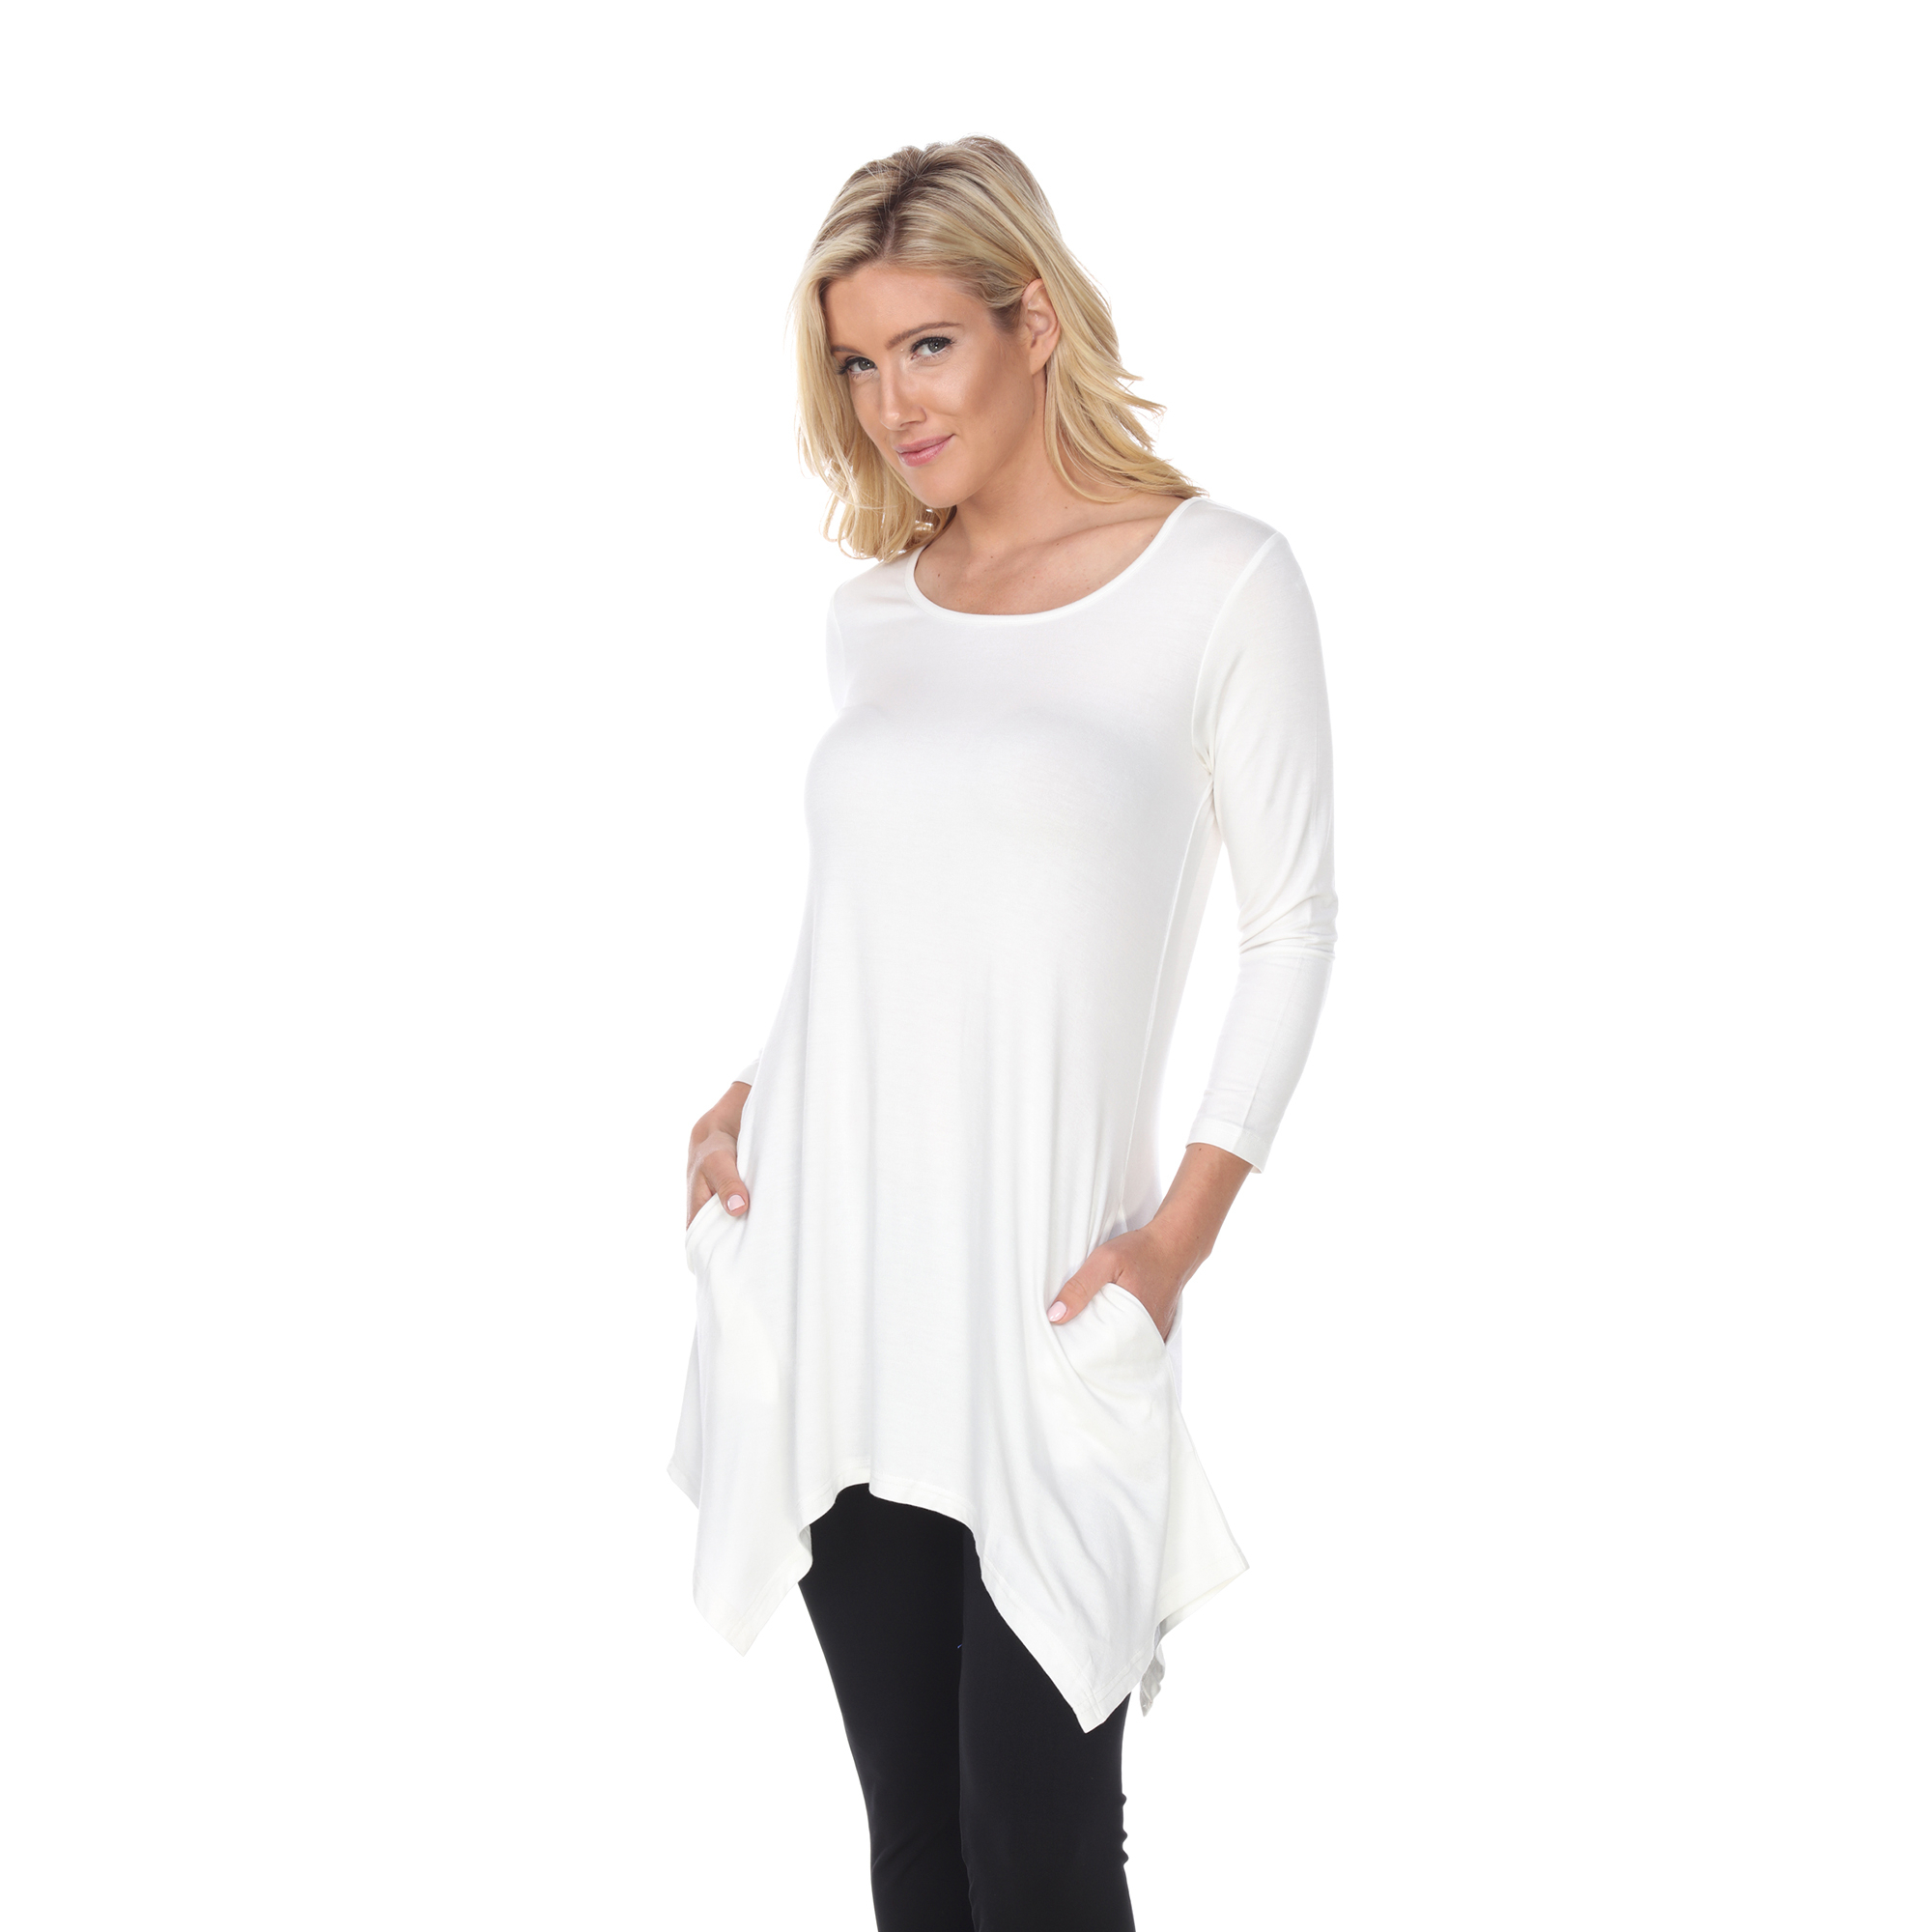 White Mark Women's Quarter Sleeve Tunic Top With Pockets - White, 6X